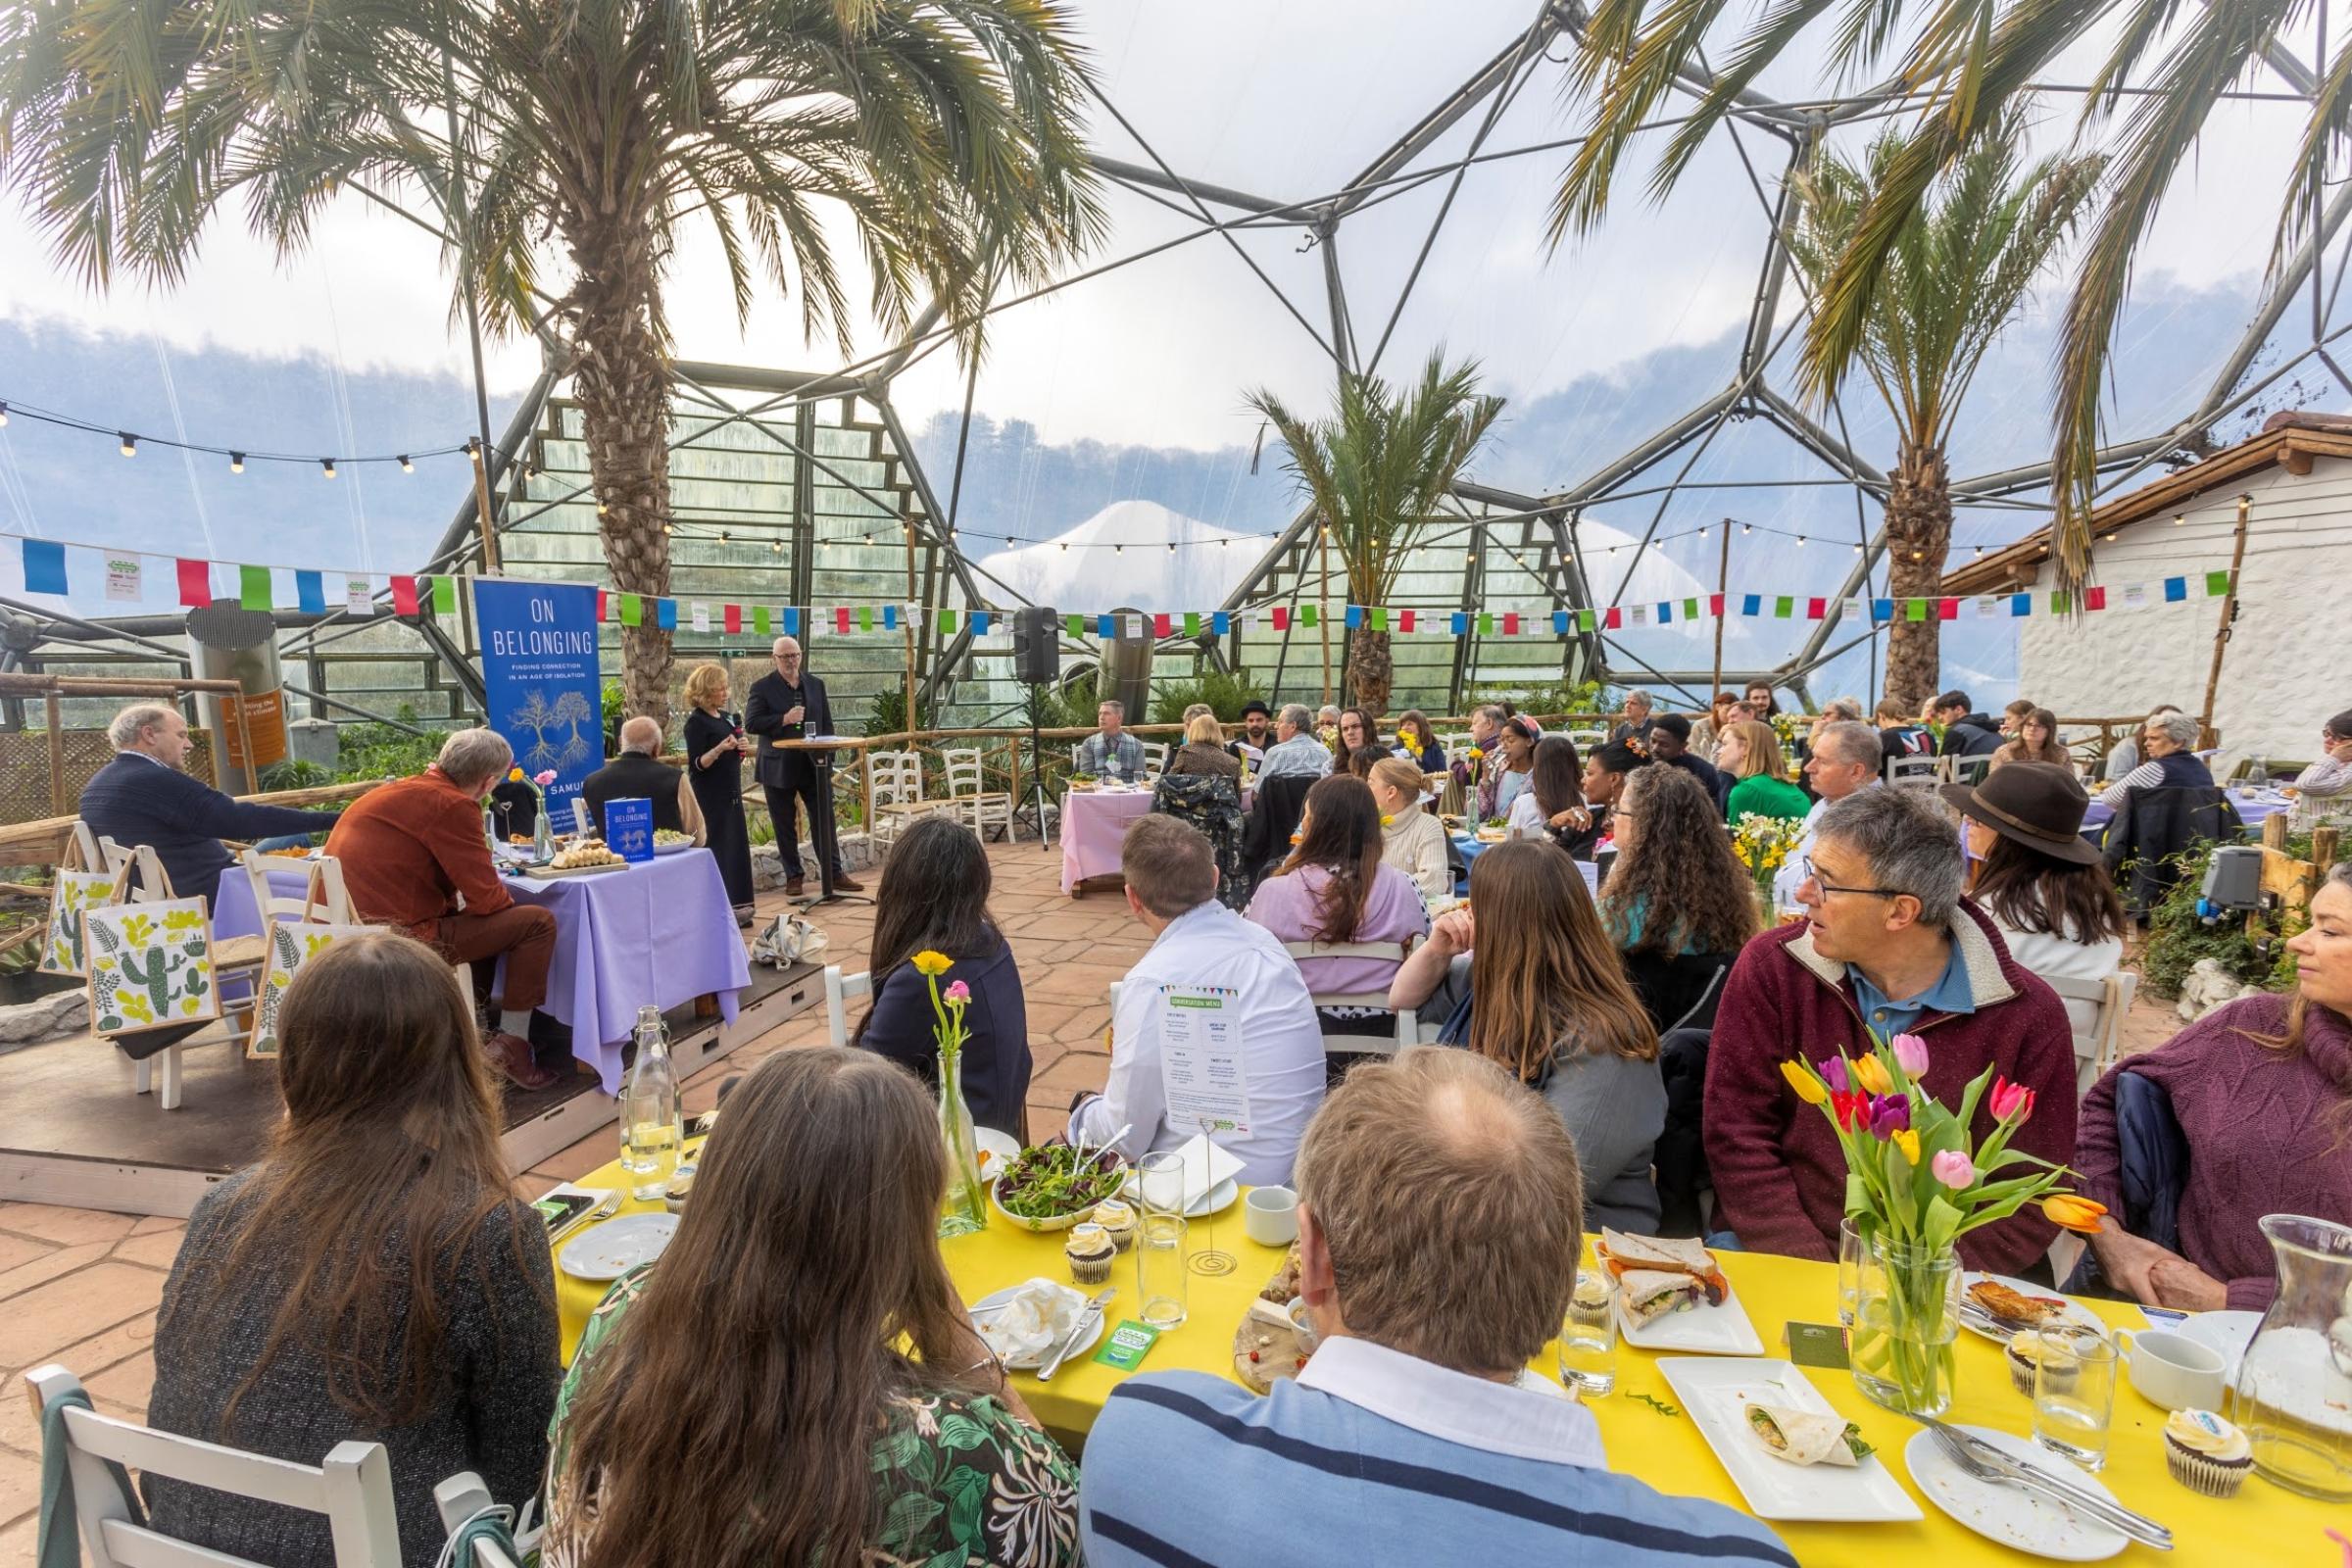 Photo of Big Lunch On Belonging at the Eden Project